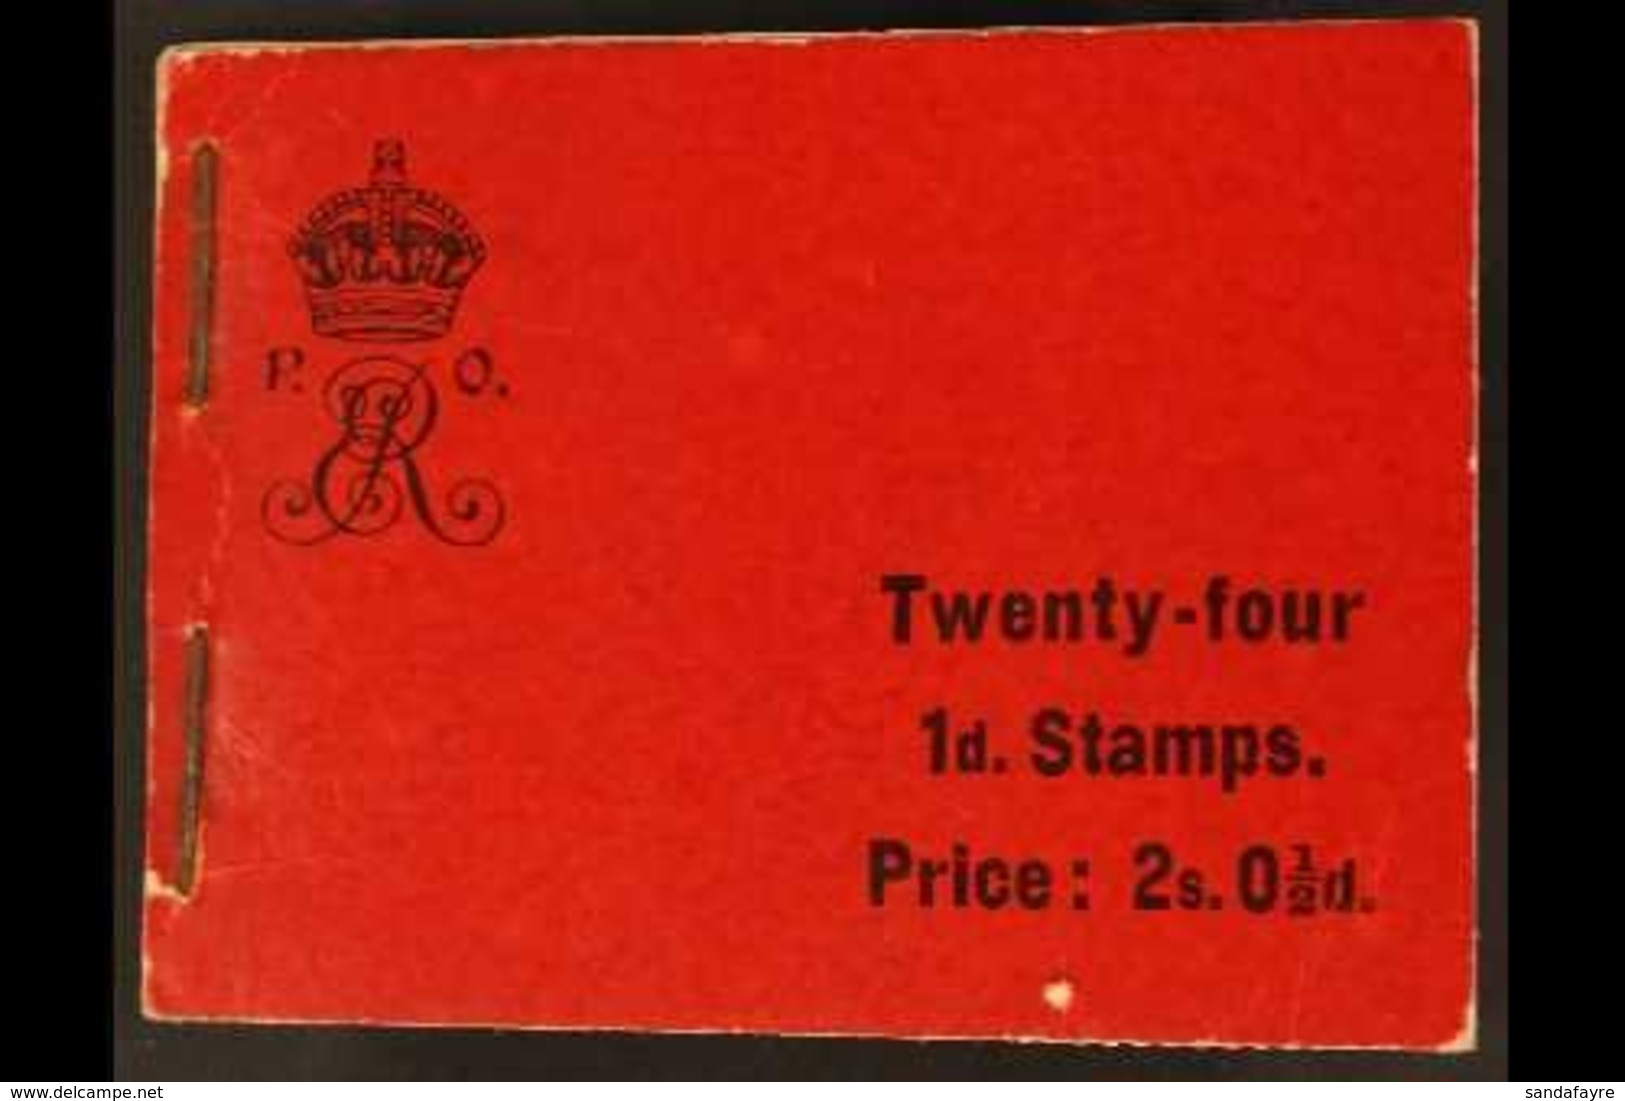 BOOKLETS 1904 2s 0½d Red Cover Booklet, 1st Ed VII Booklet, SG BA1, Fine And Fresh Mint All Perfs Intact. For More Image - Unclassified